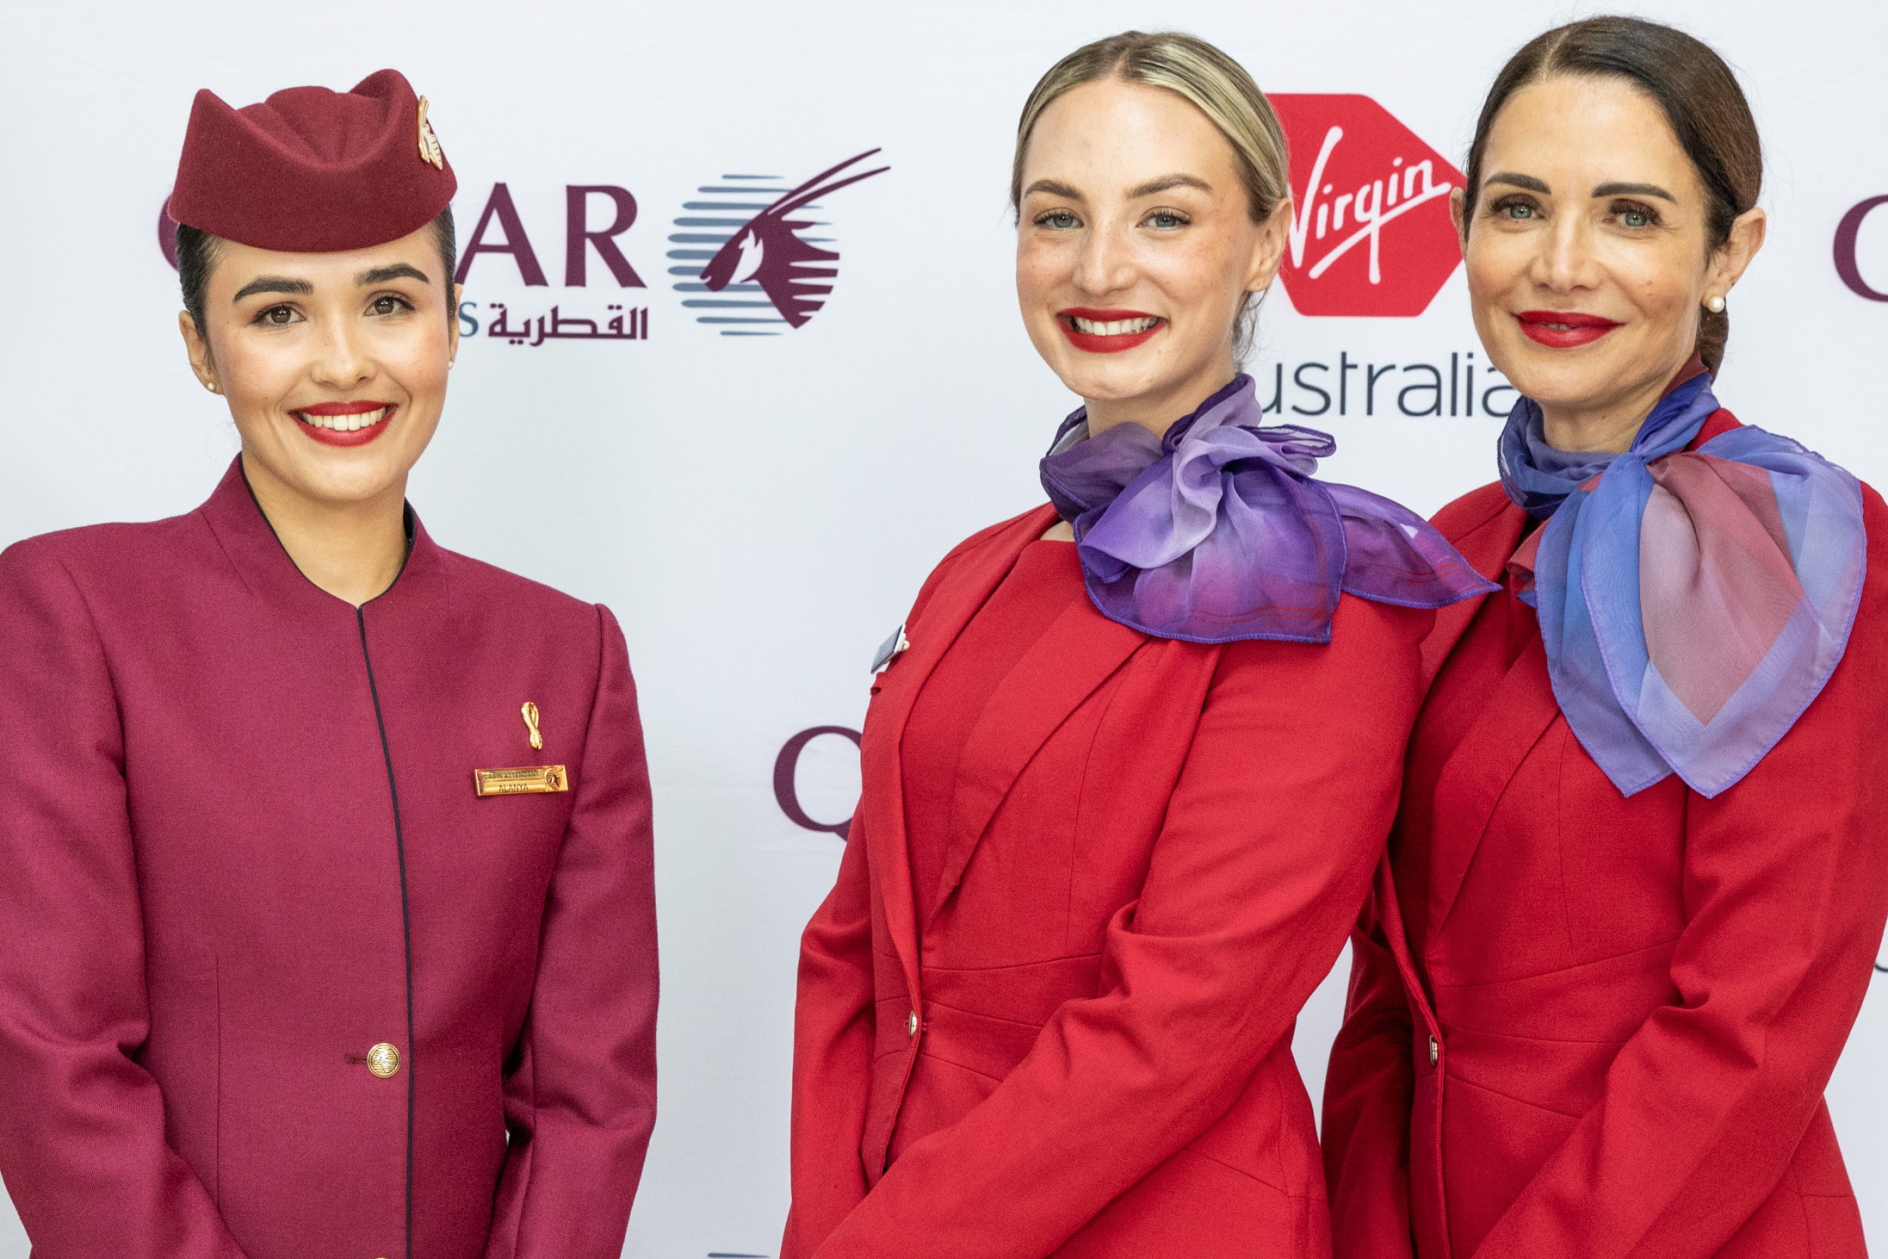 Qatar Airways and Virgin Australia have officially commenced a strategic partnership. Click to enlarge.